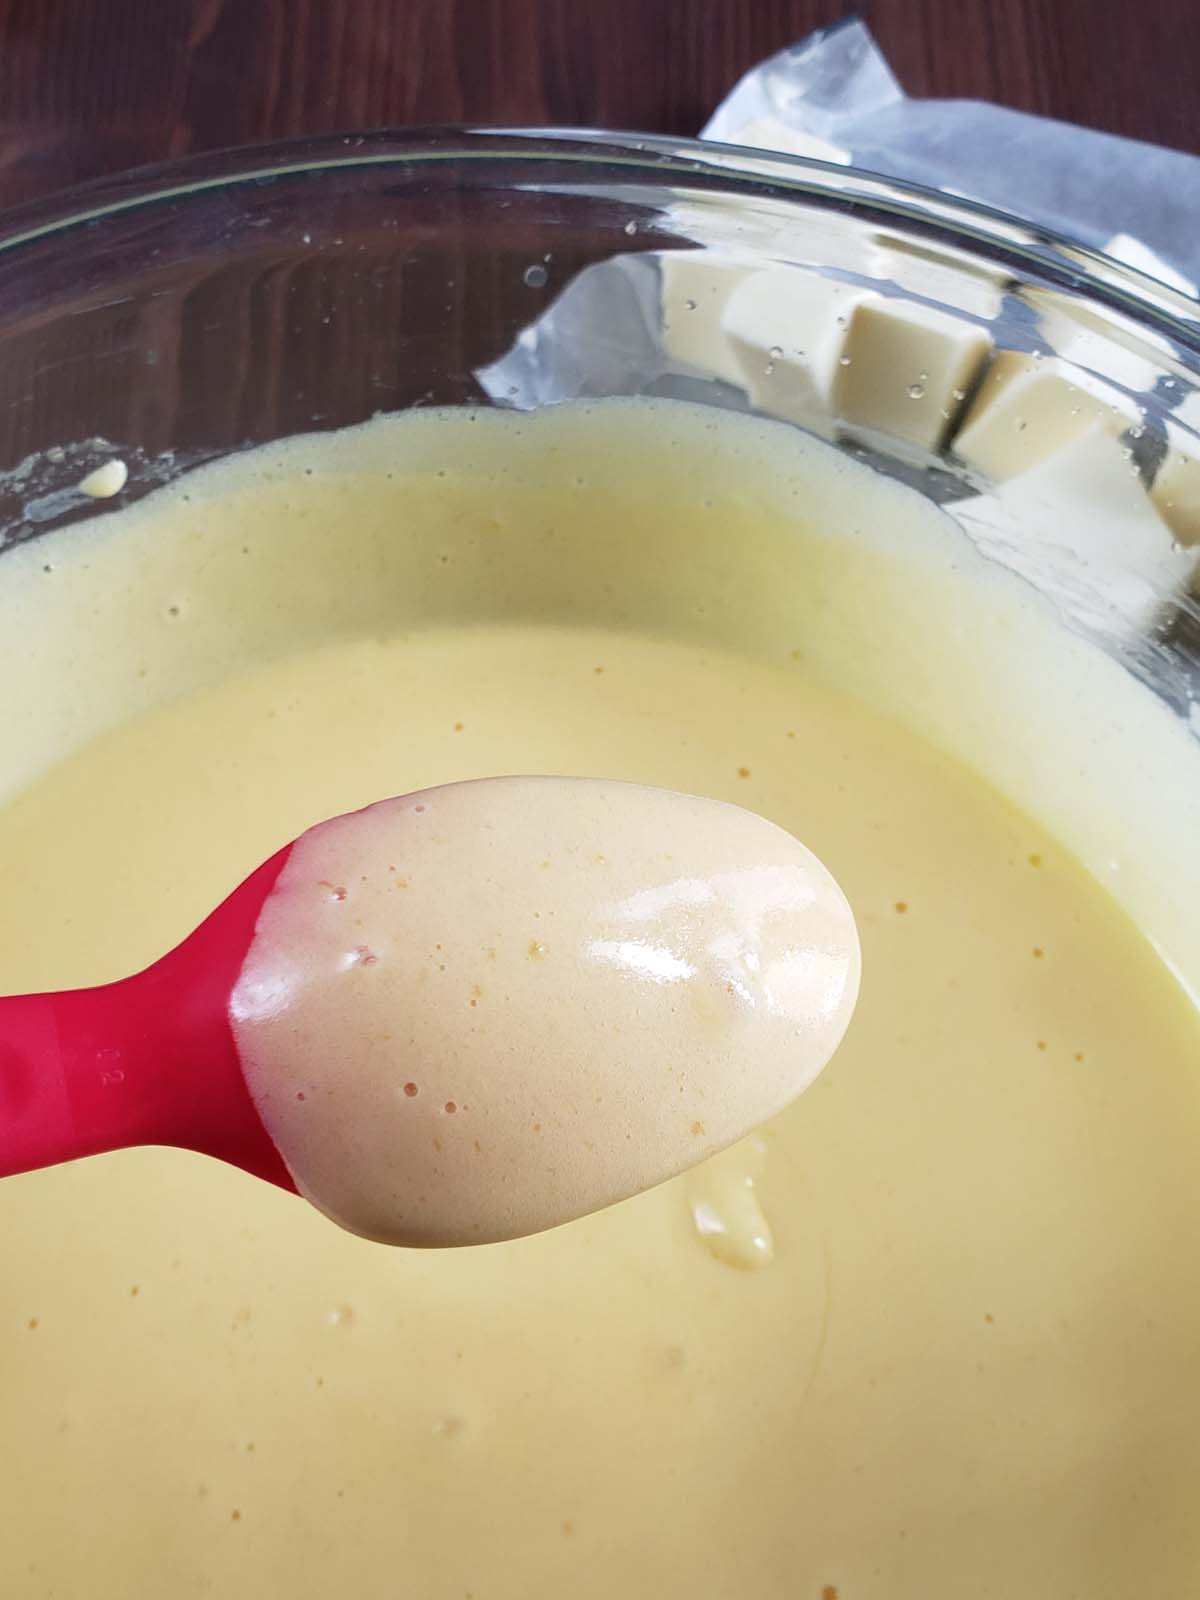 Lemon curd coating the back of a spoon.